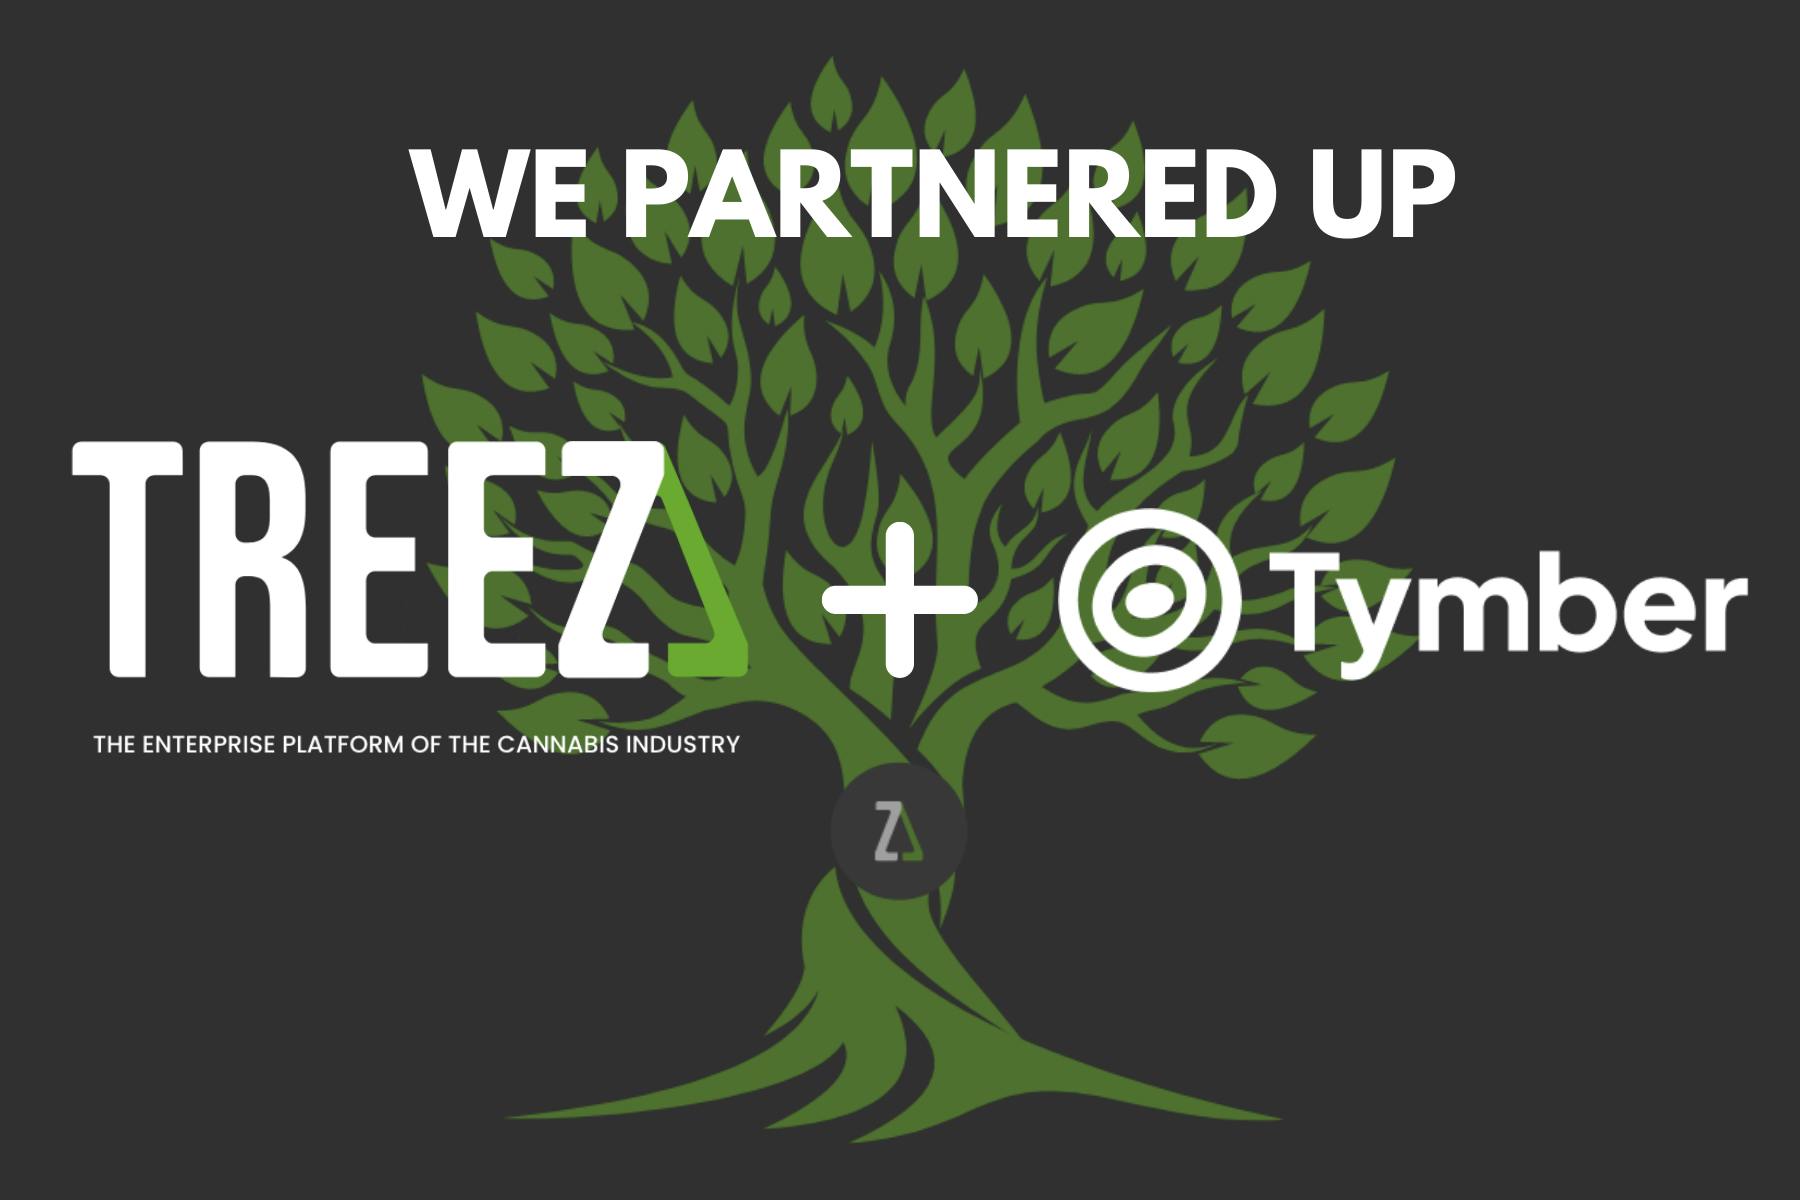 A visualization of a Tree on top of Treez plus Tymber